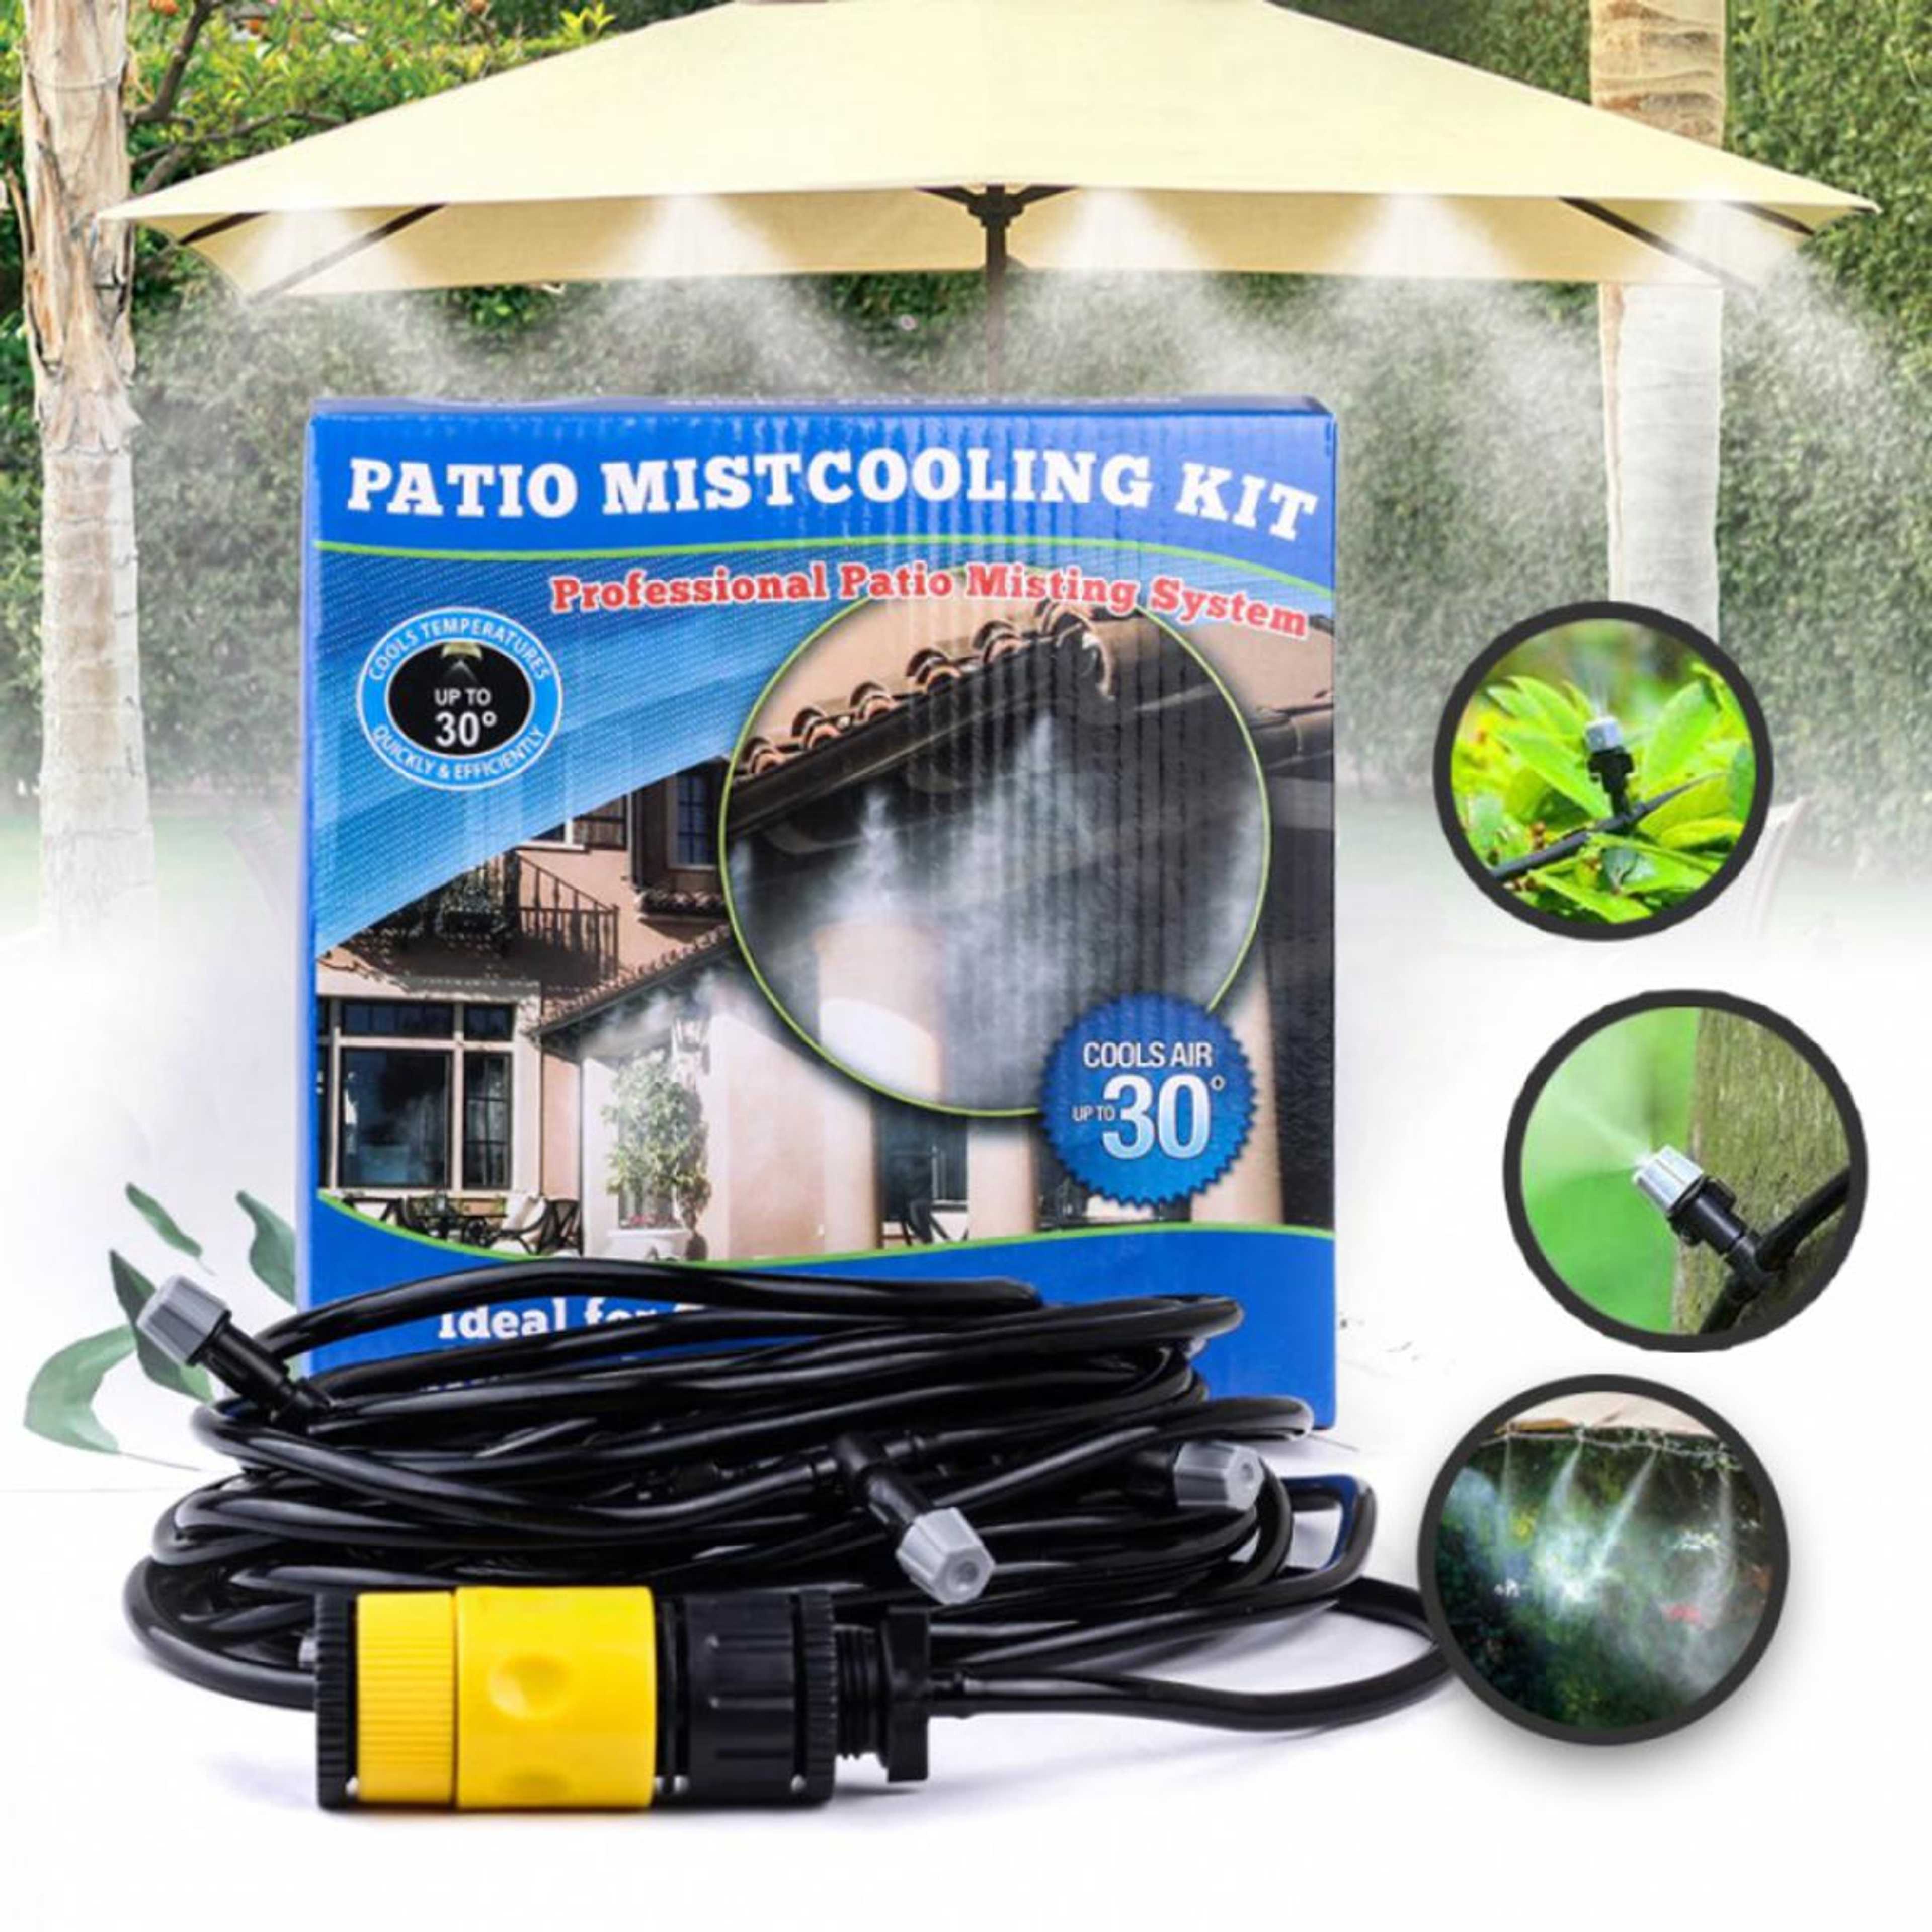 Patio Mist Cooling Kit Cools Air Up To 30 Degree